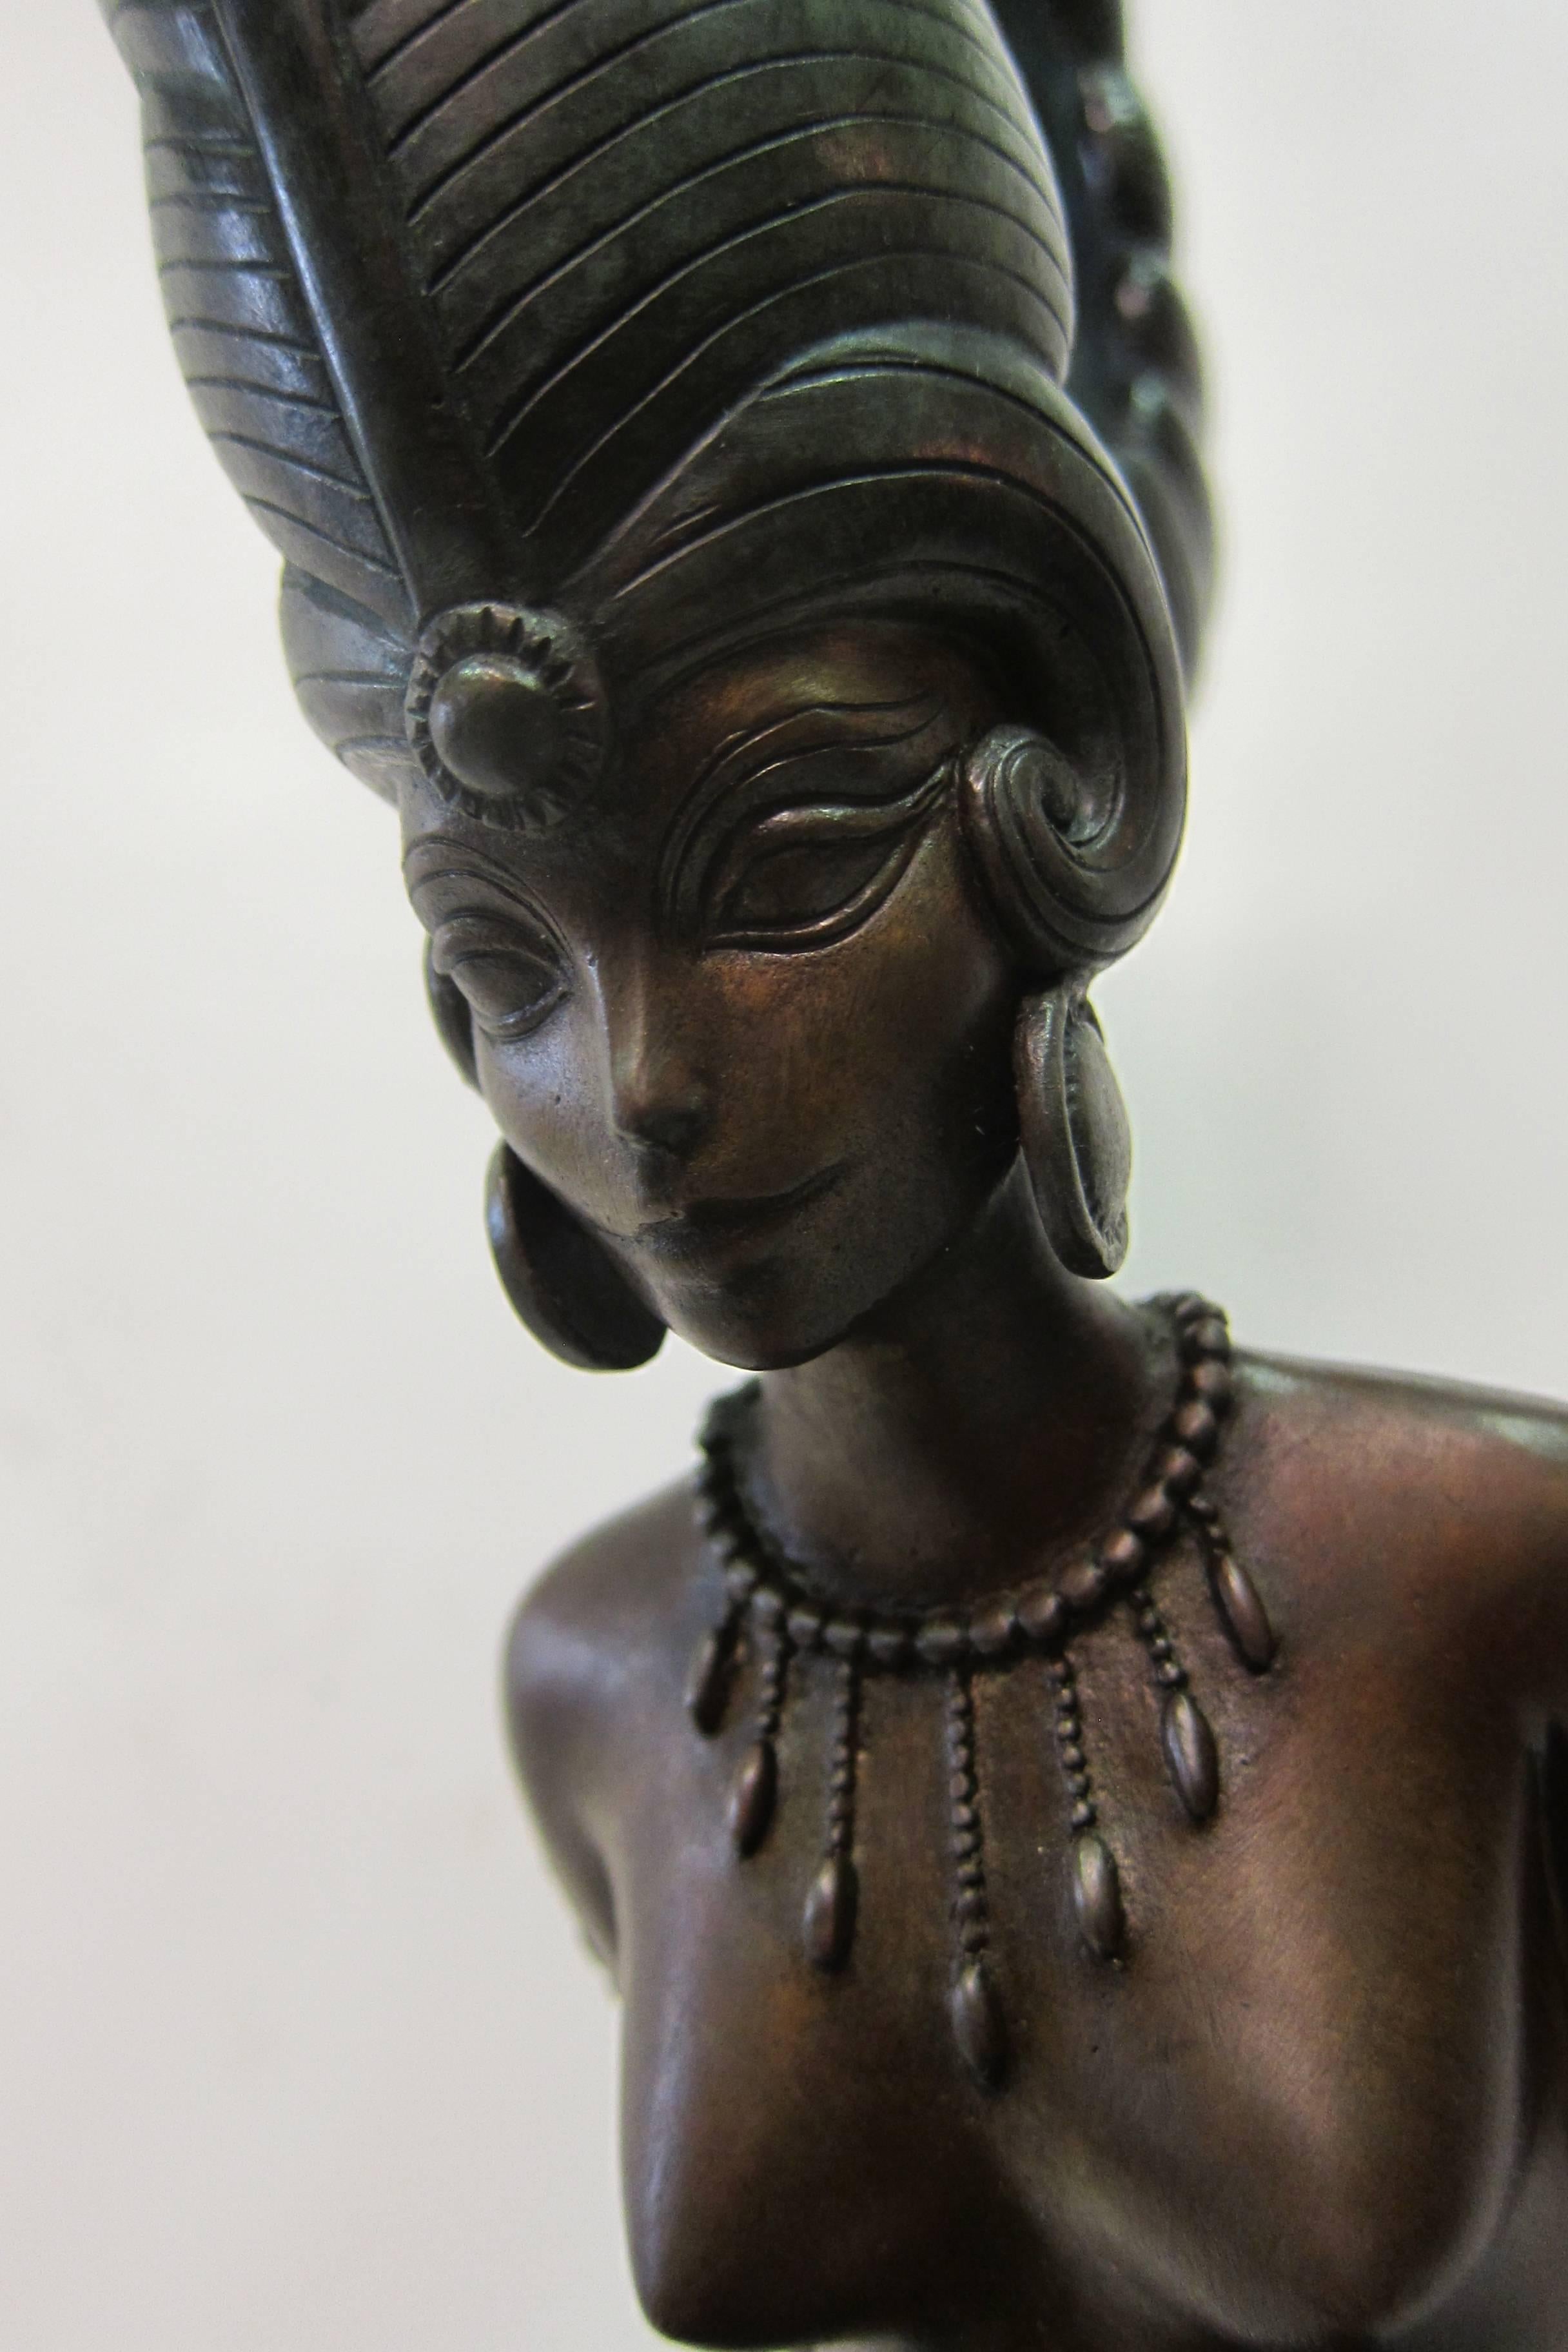 This stylish 1981 Art Deco style sculpture by the famed artist 